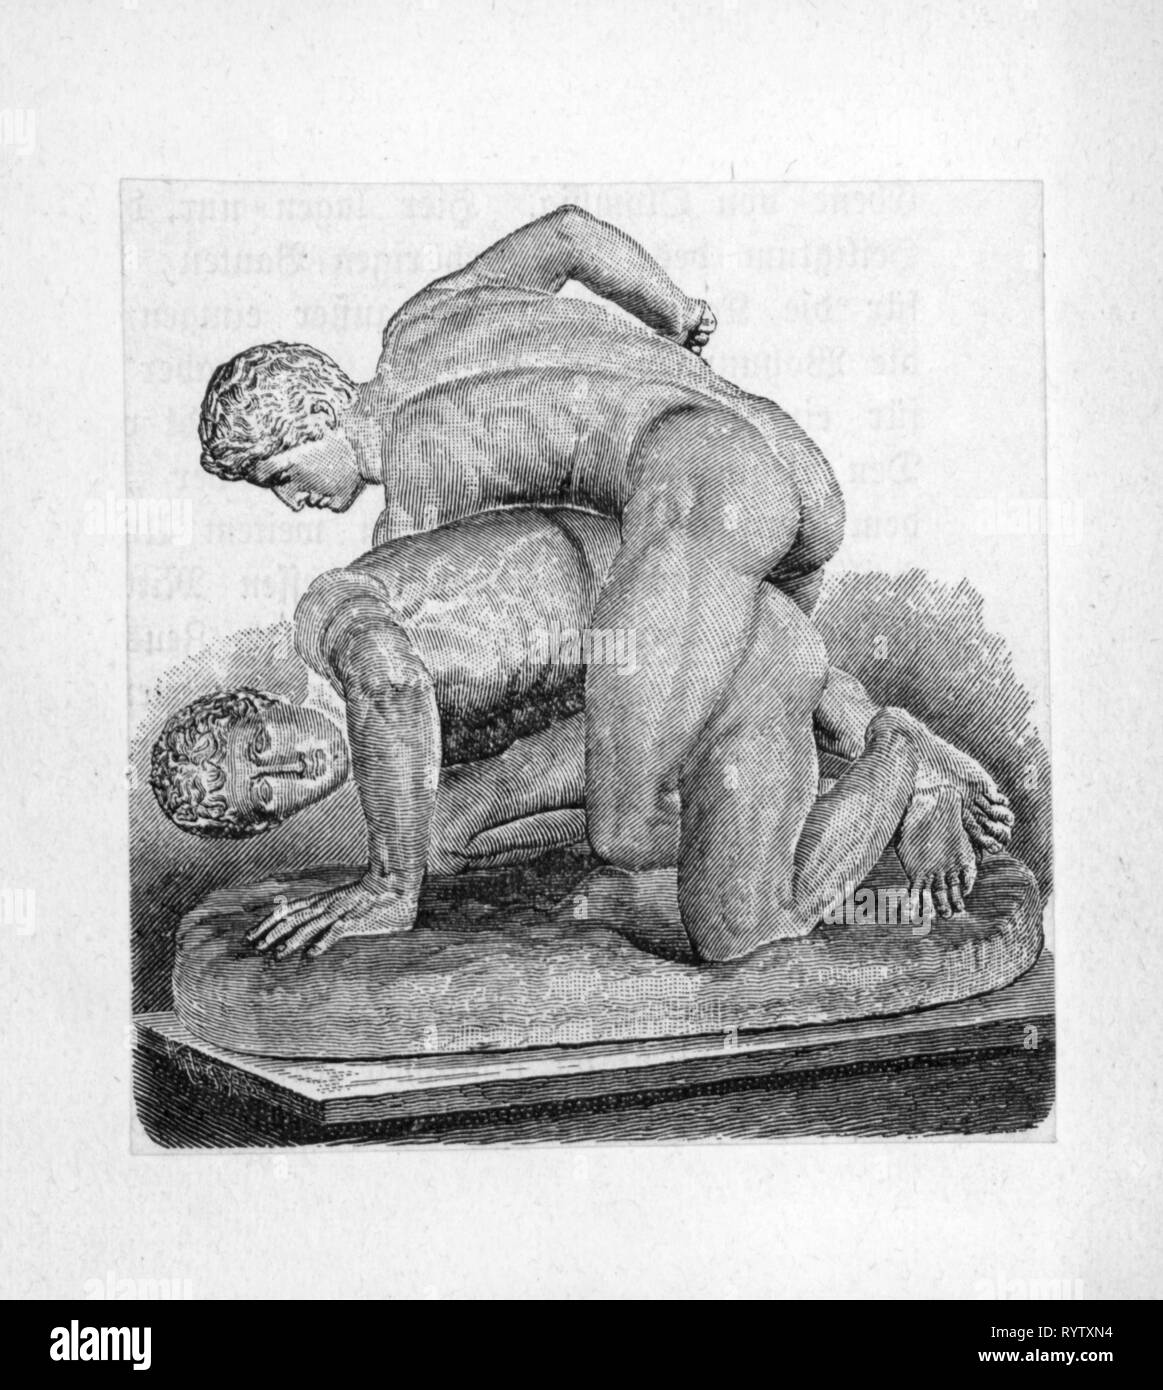 sports, pankration, ancient world, Florentine wrestler group, sculpture, Roman copy, 3rd century BC, wood engraving, 19th century, pankratiasts, athlete, athletes, fight, fights, people, men, man, Greece, ancient world, ancient times, sculpture, sculptures, copy, copies, historic, historical, full-length, full length, Artist's Copyright has not to be cleared Stock Photo